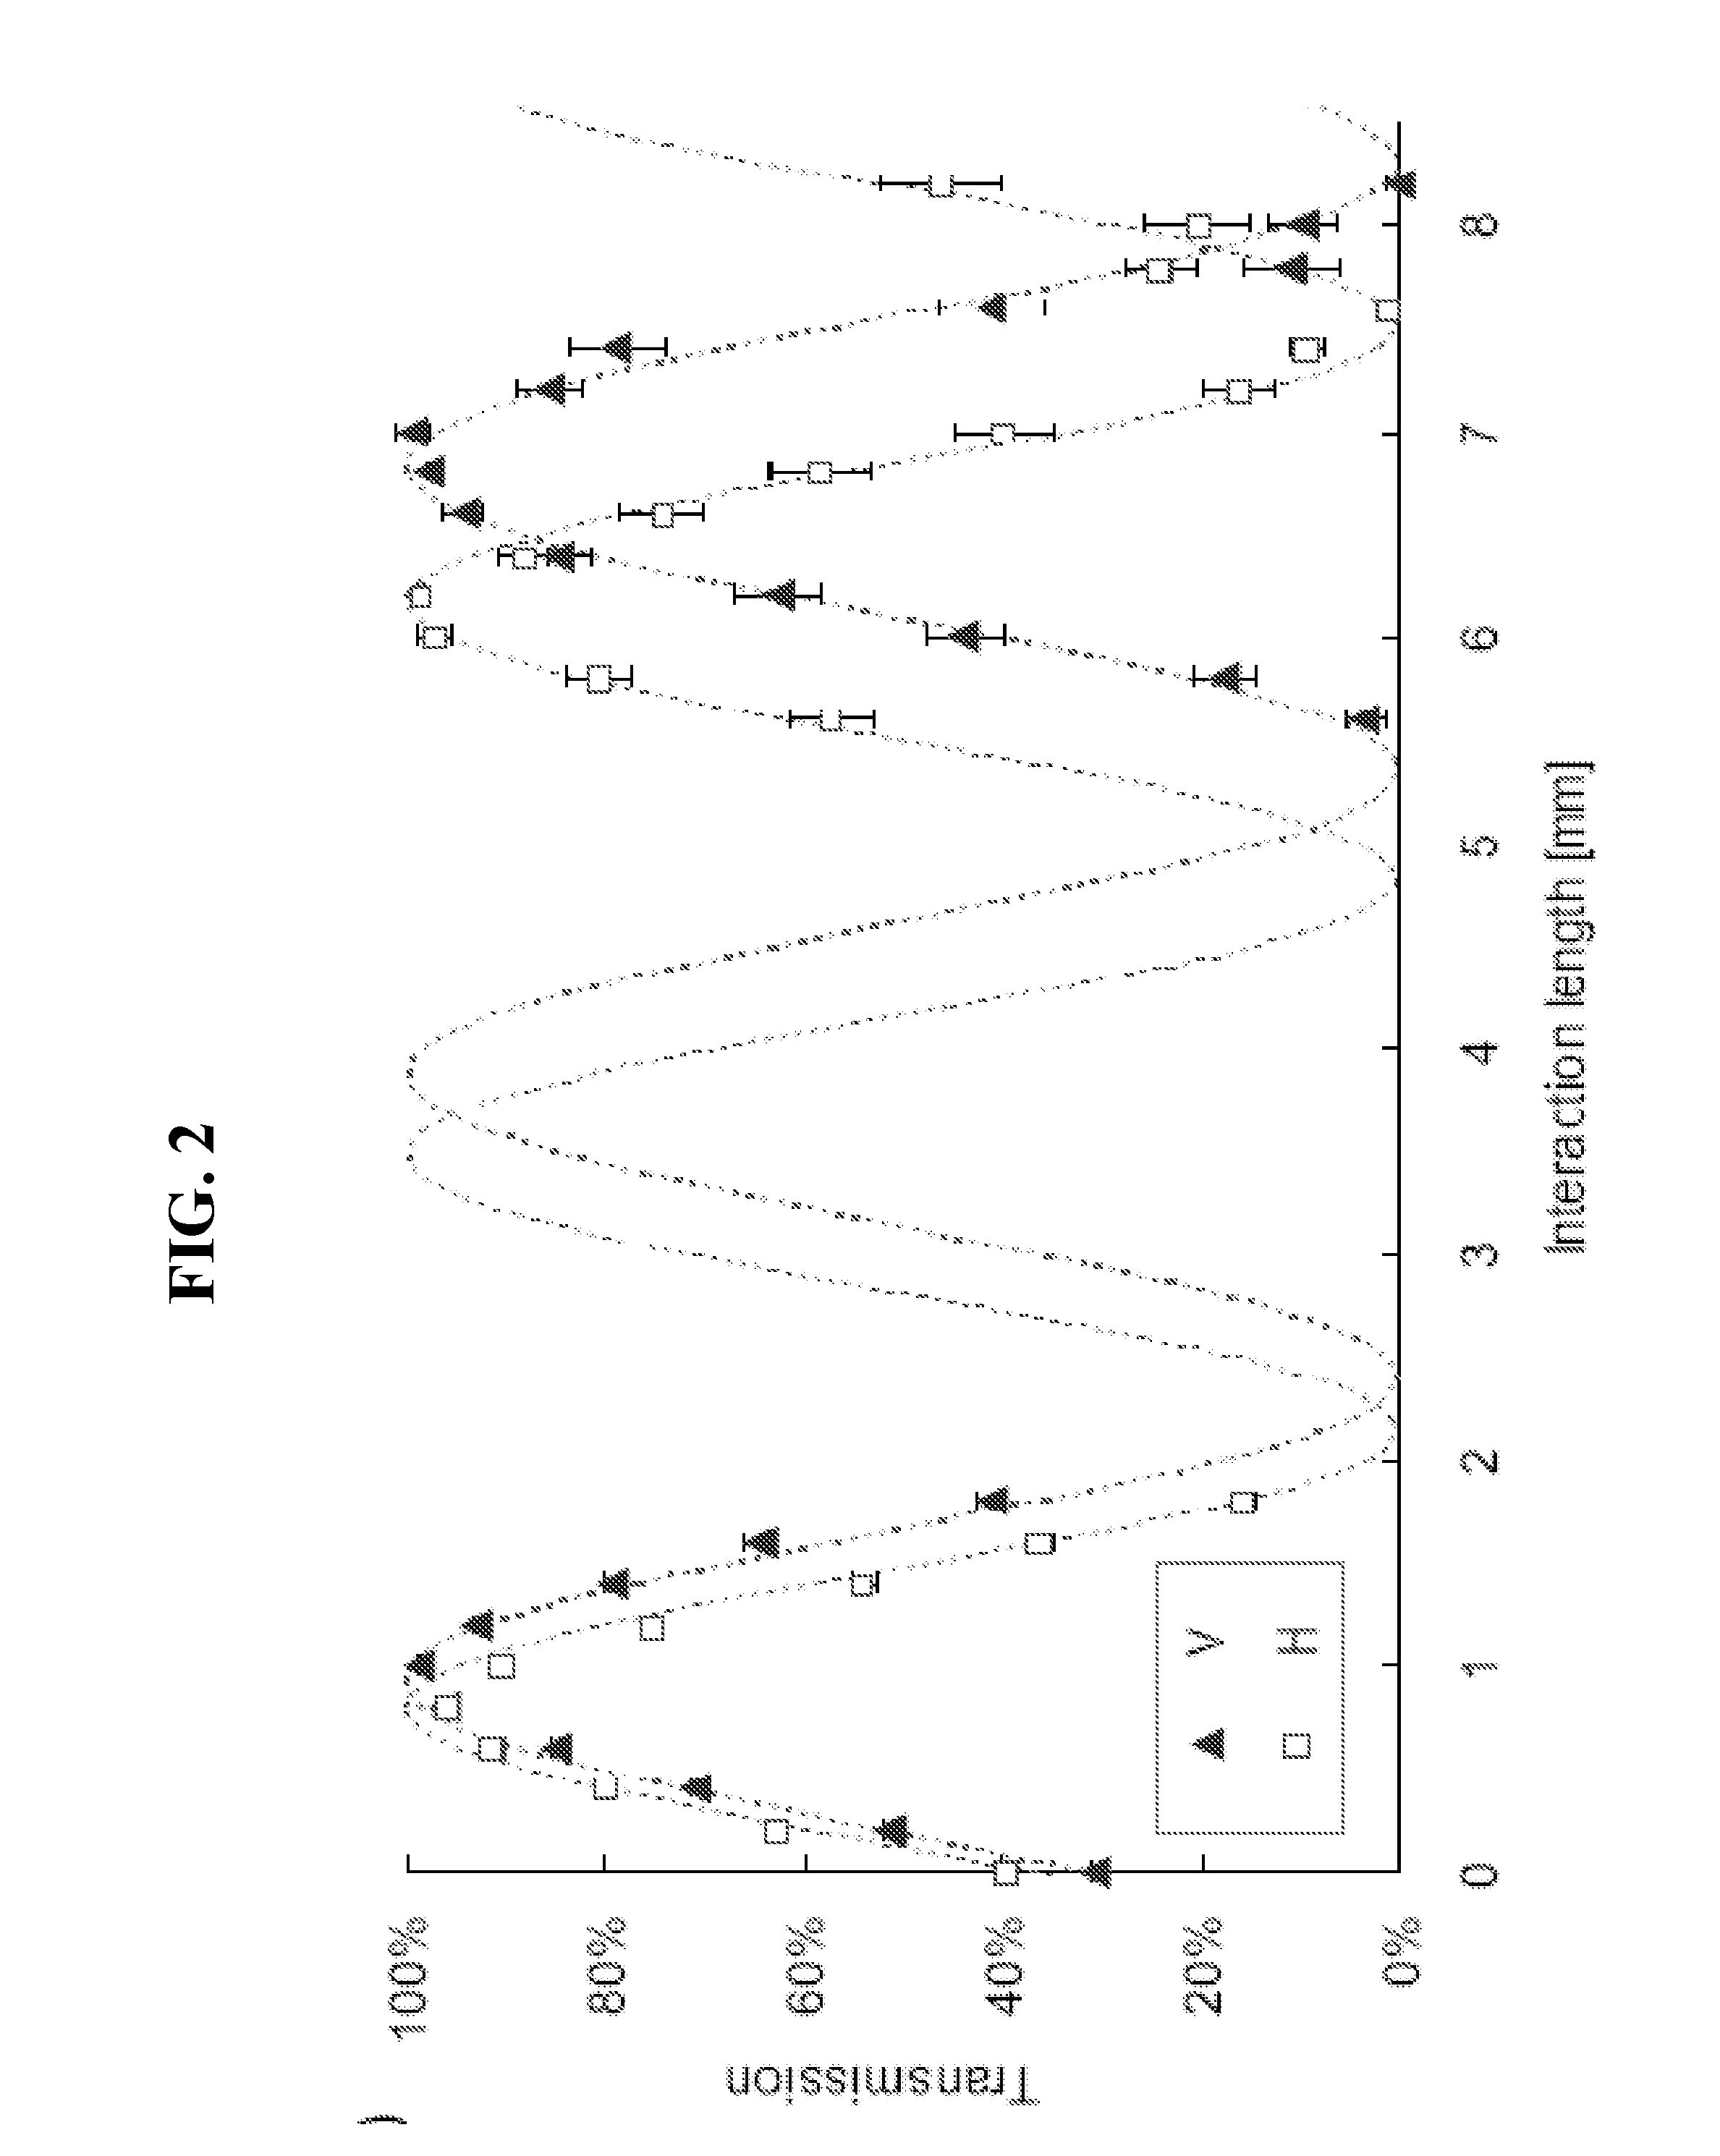 Integrated optics logic gate for polarization-encoded quantum qubits and a method for the production and use thereof